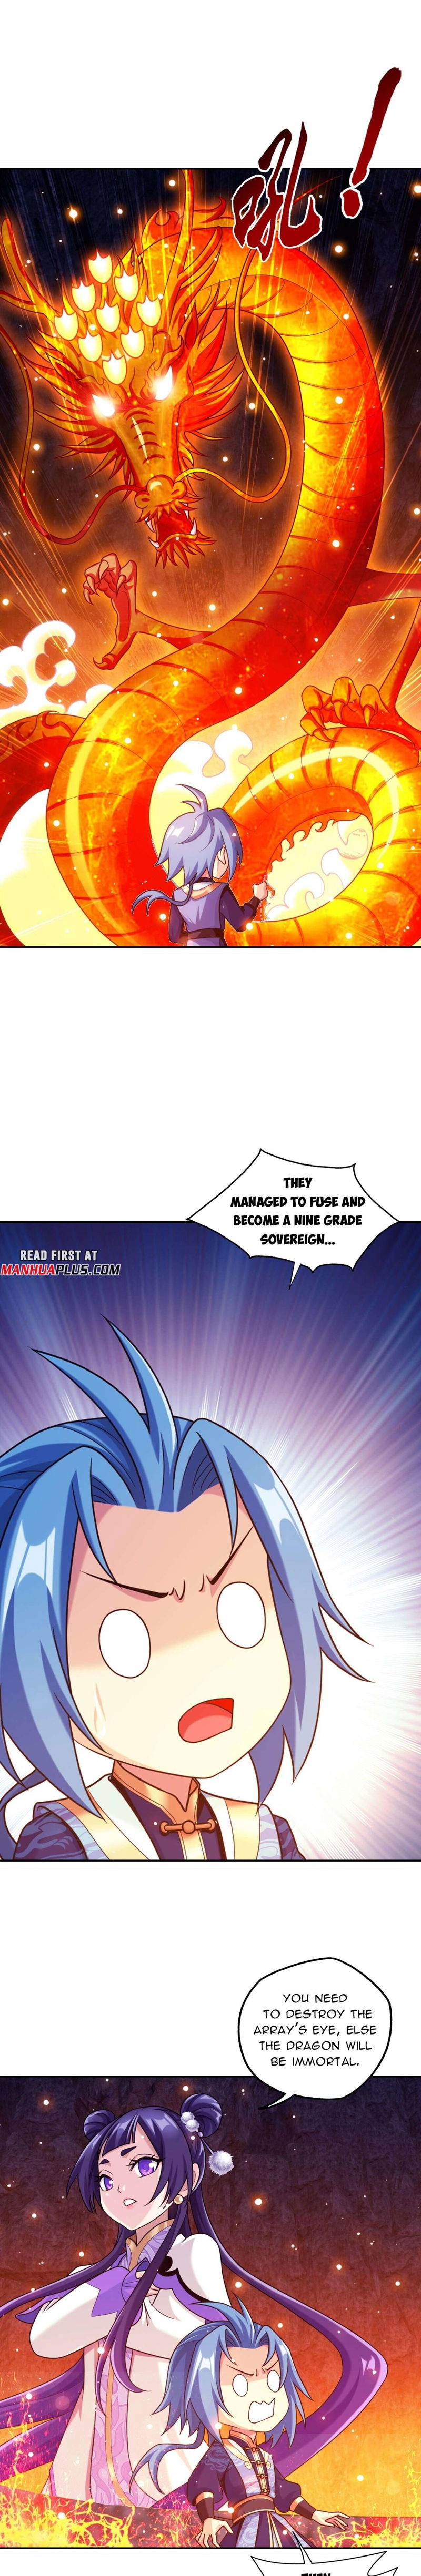 The Great Ruler Chapter 427 page 7